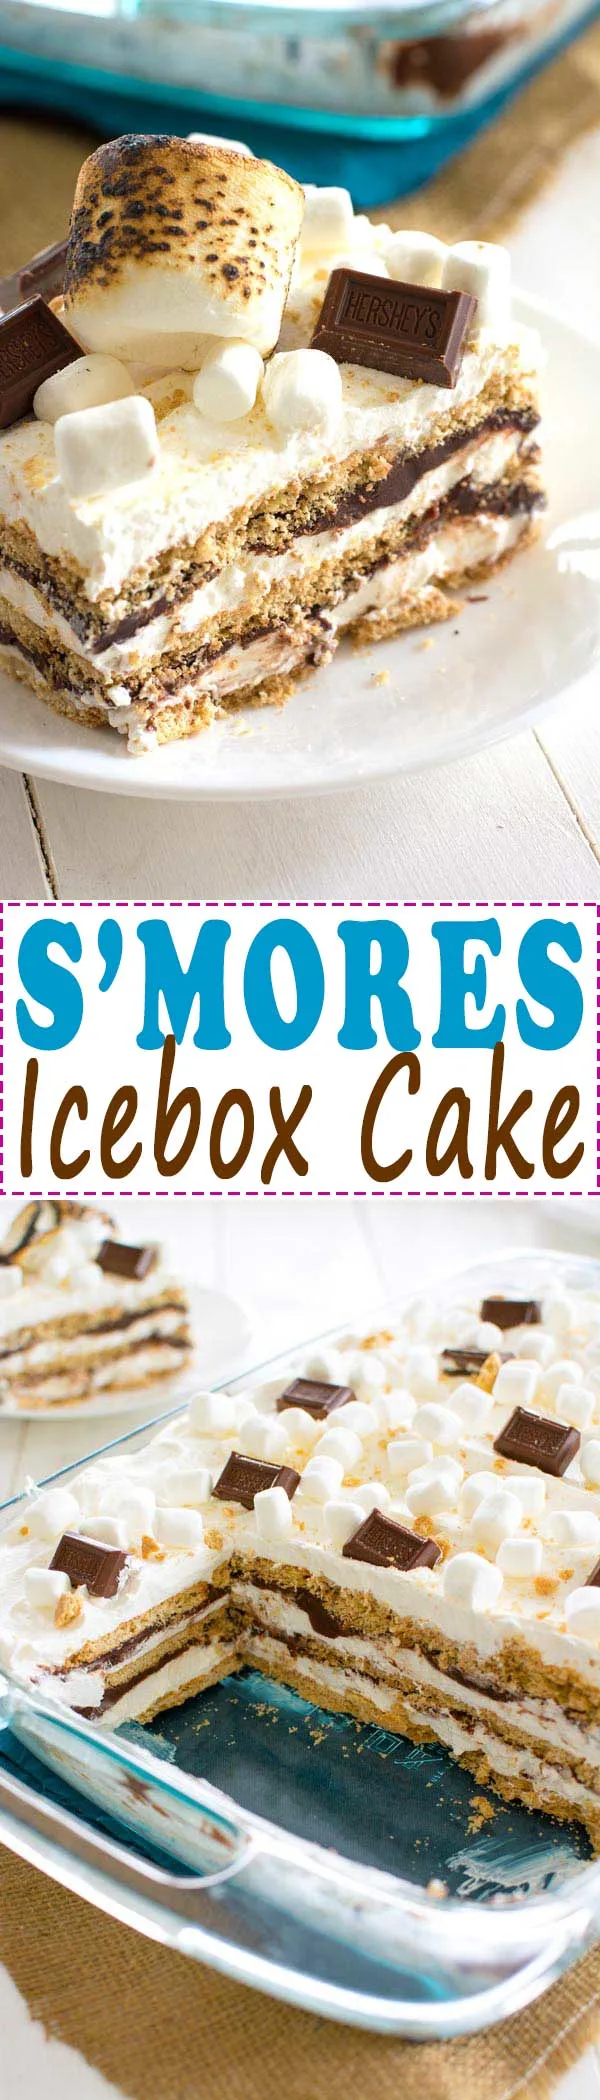 No-bake S'mores Icebox Cake with layers of graham crackers, marshmallow cream and chocolate - this dessert feeds a crowd!